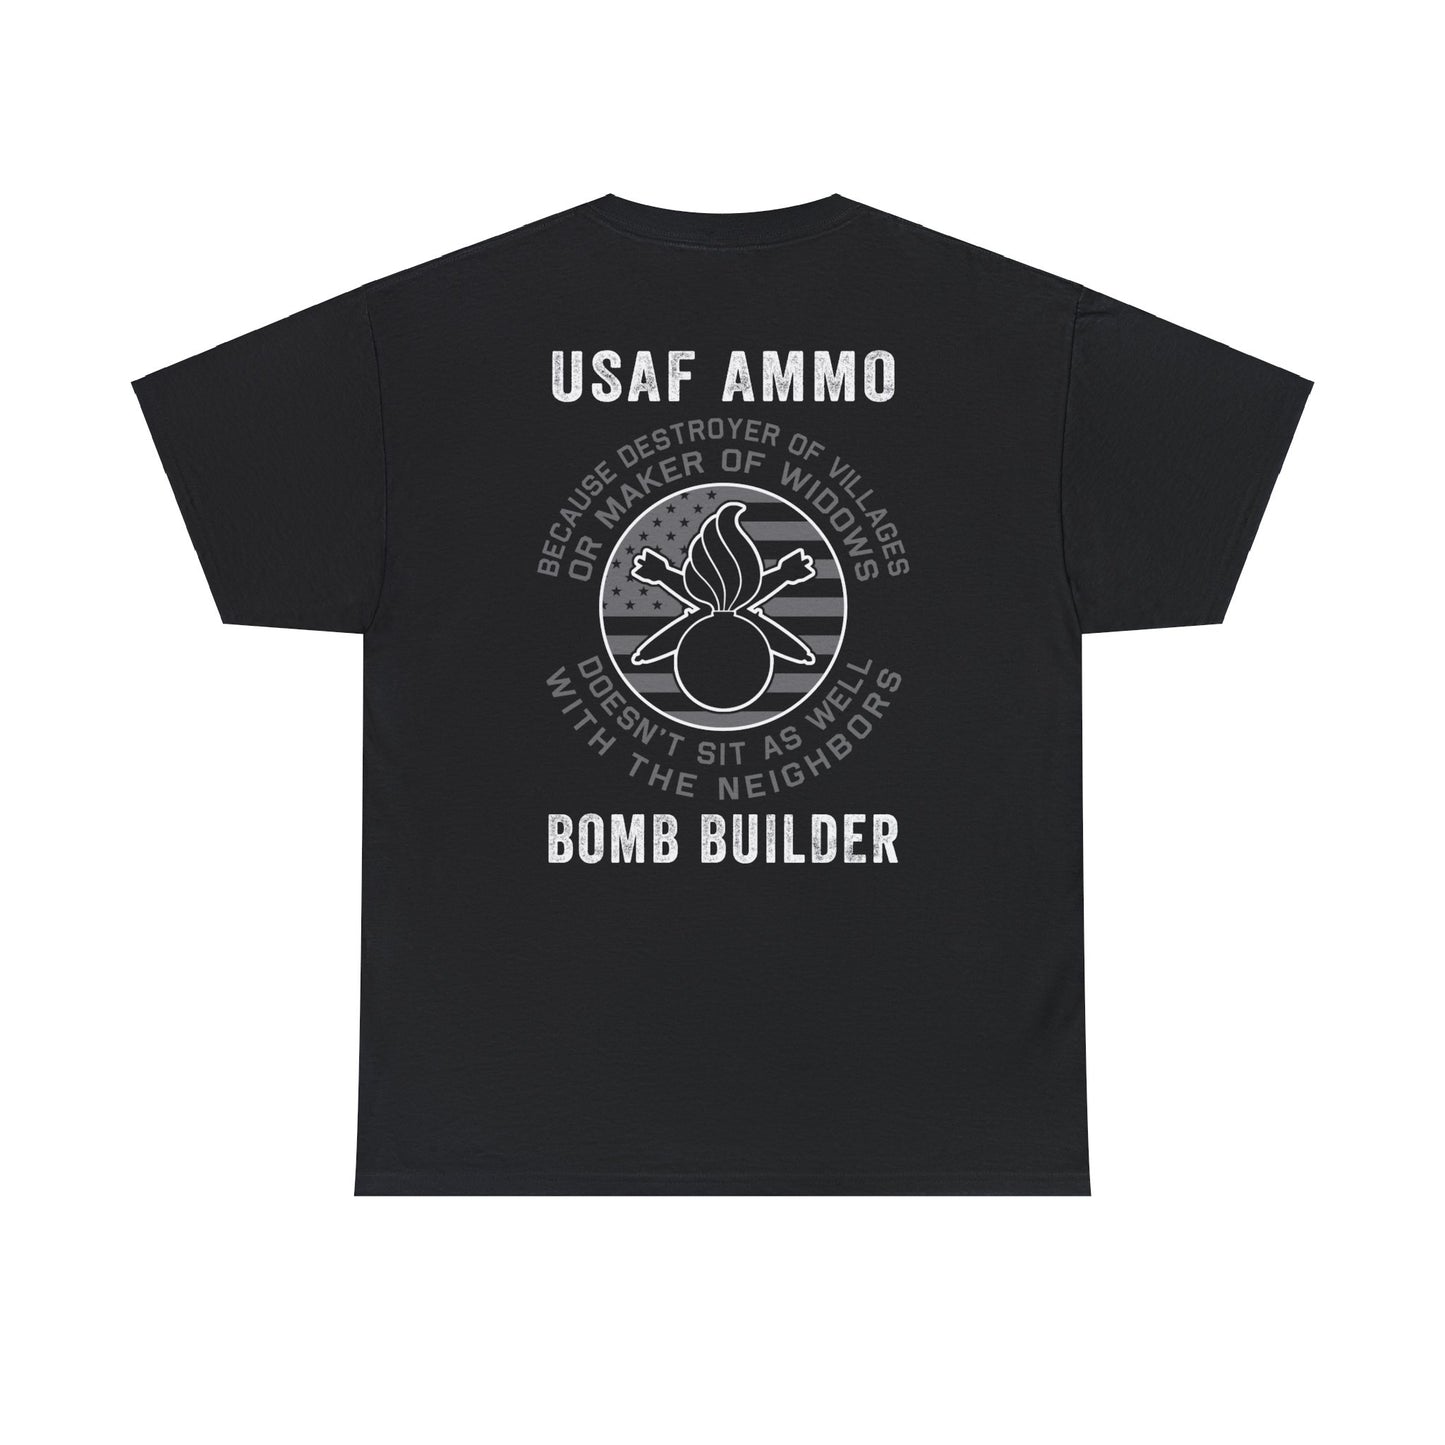 USAF AMMO Bomb Builder Because Destroyer of Villages or Maker of Widows Doesn't Sit Well With The Neighbors Pisspot IYAAYAS Unisex Gift Shirt